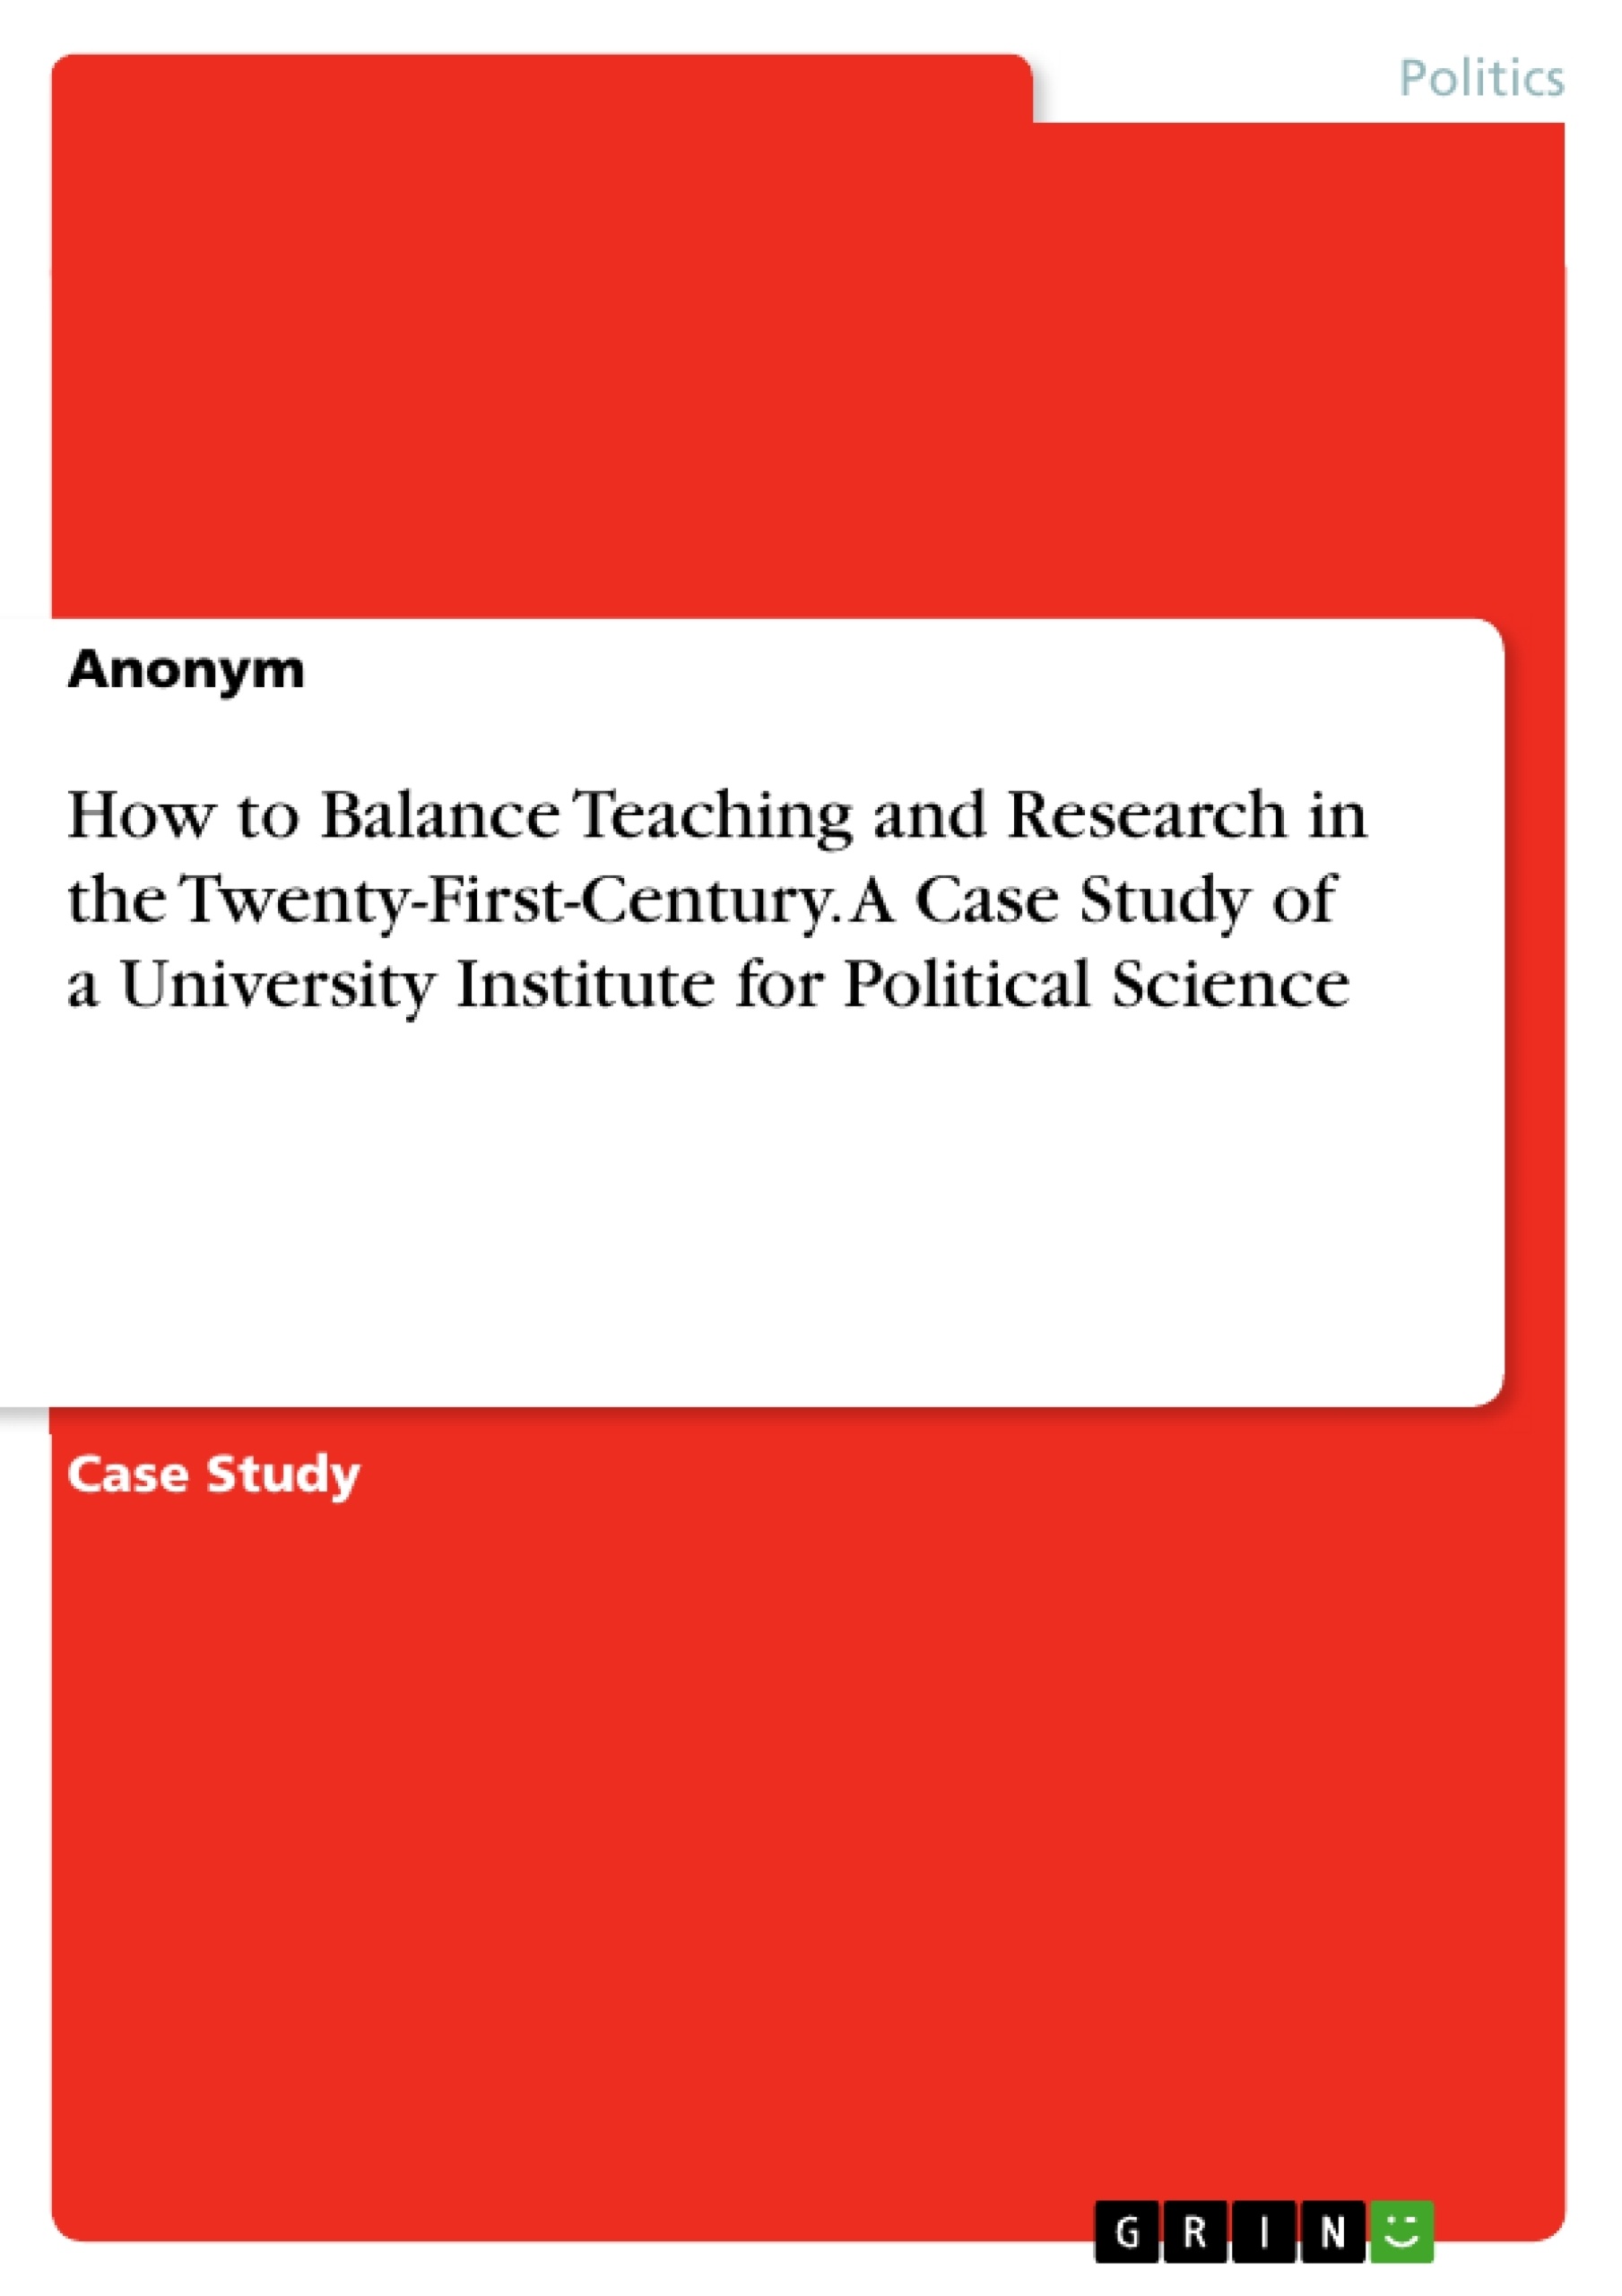 Title: How to Balance Teaching and Research in the Twenty-First-Century. A Case Study of a University Institute for Political Science